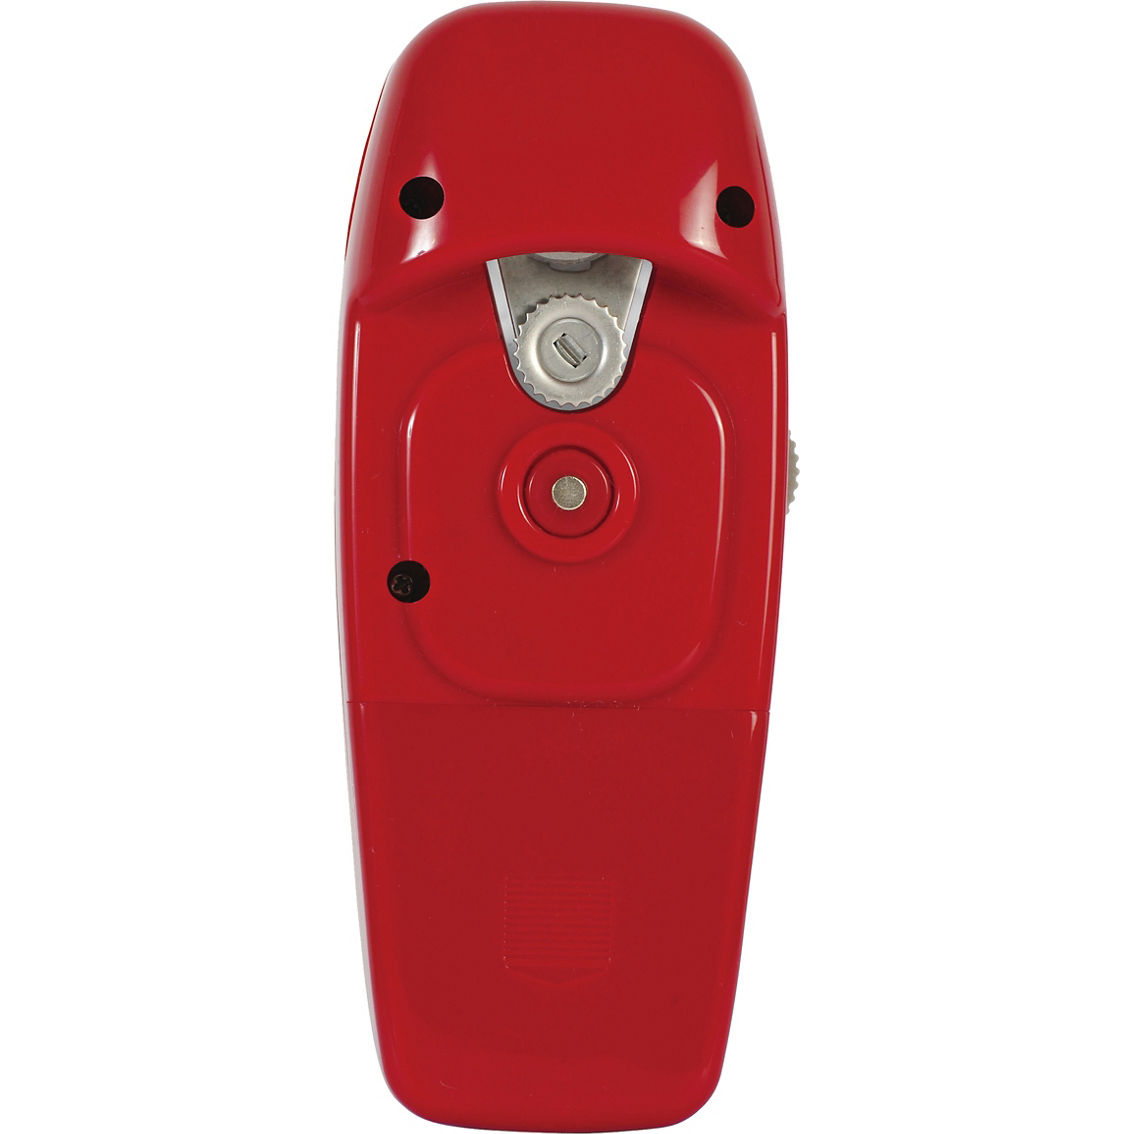 Handy Can Opener Automatic One Touch Electric Can Opener - Image 2 of 5